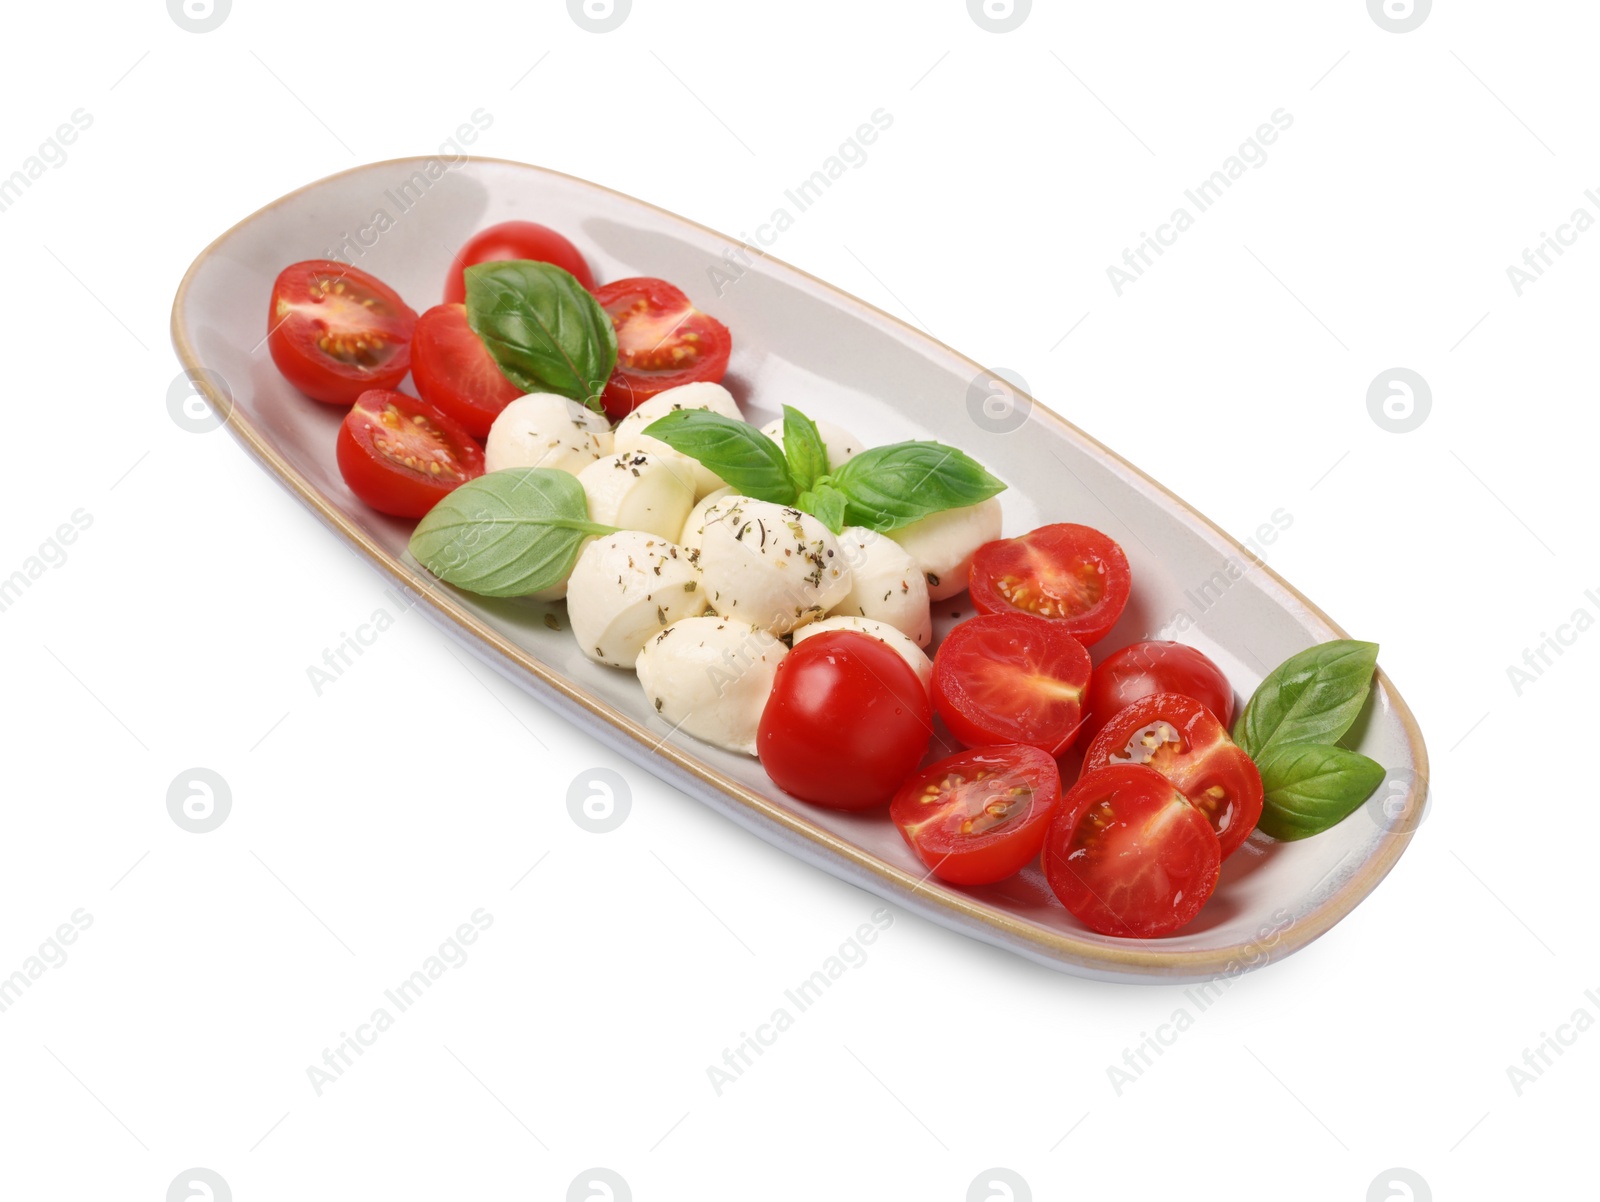 Photo of Plate of delicious Caprese salad with tomatoes, mozzarella, basil and spices isolated on white